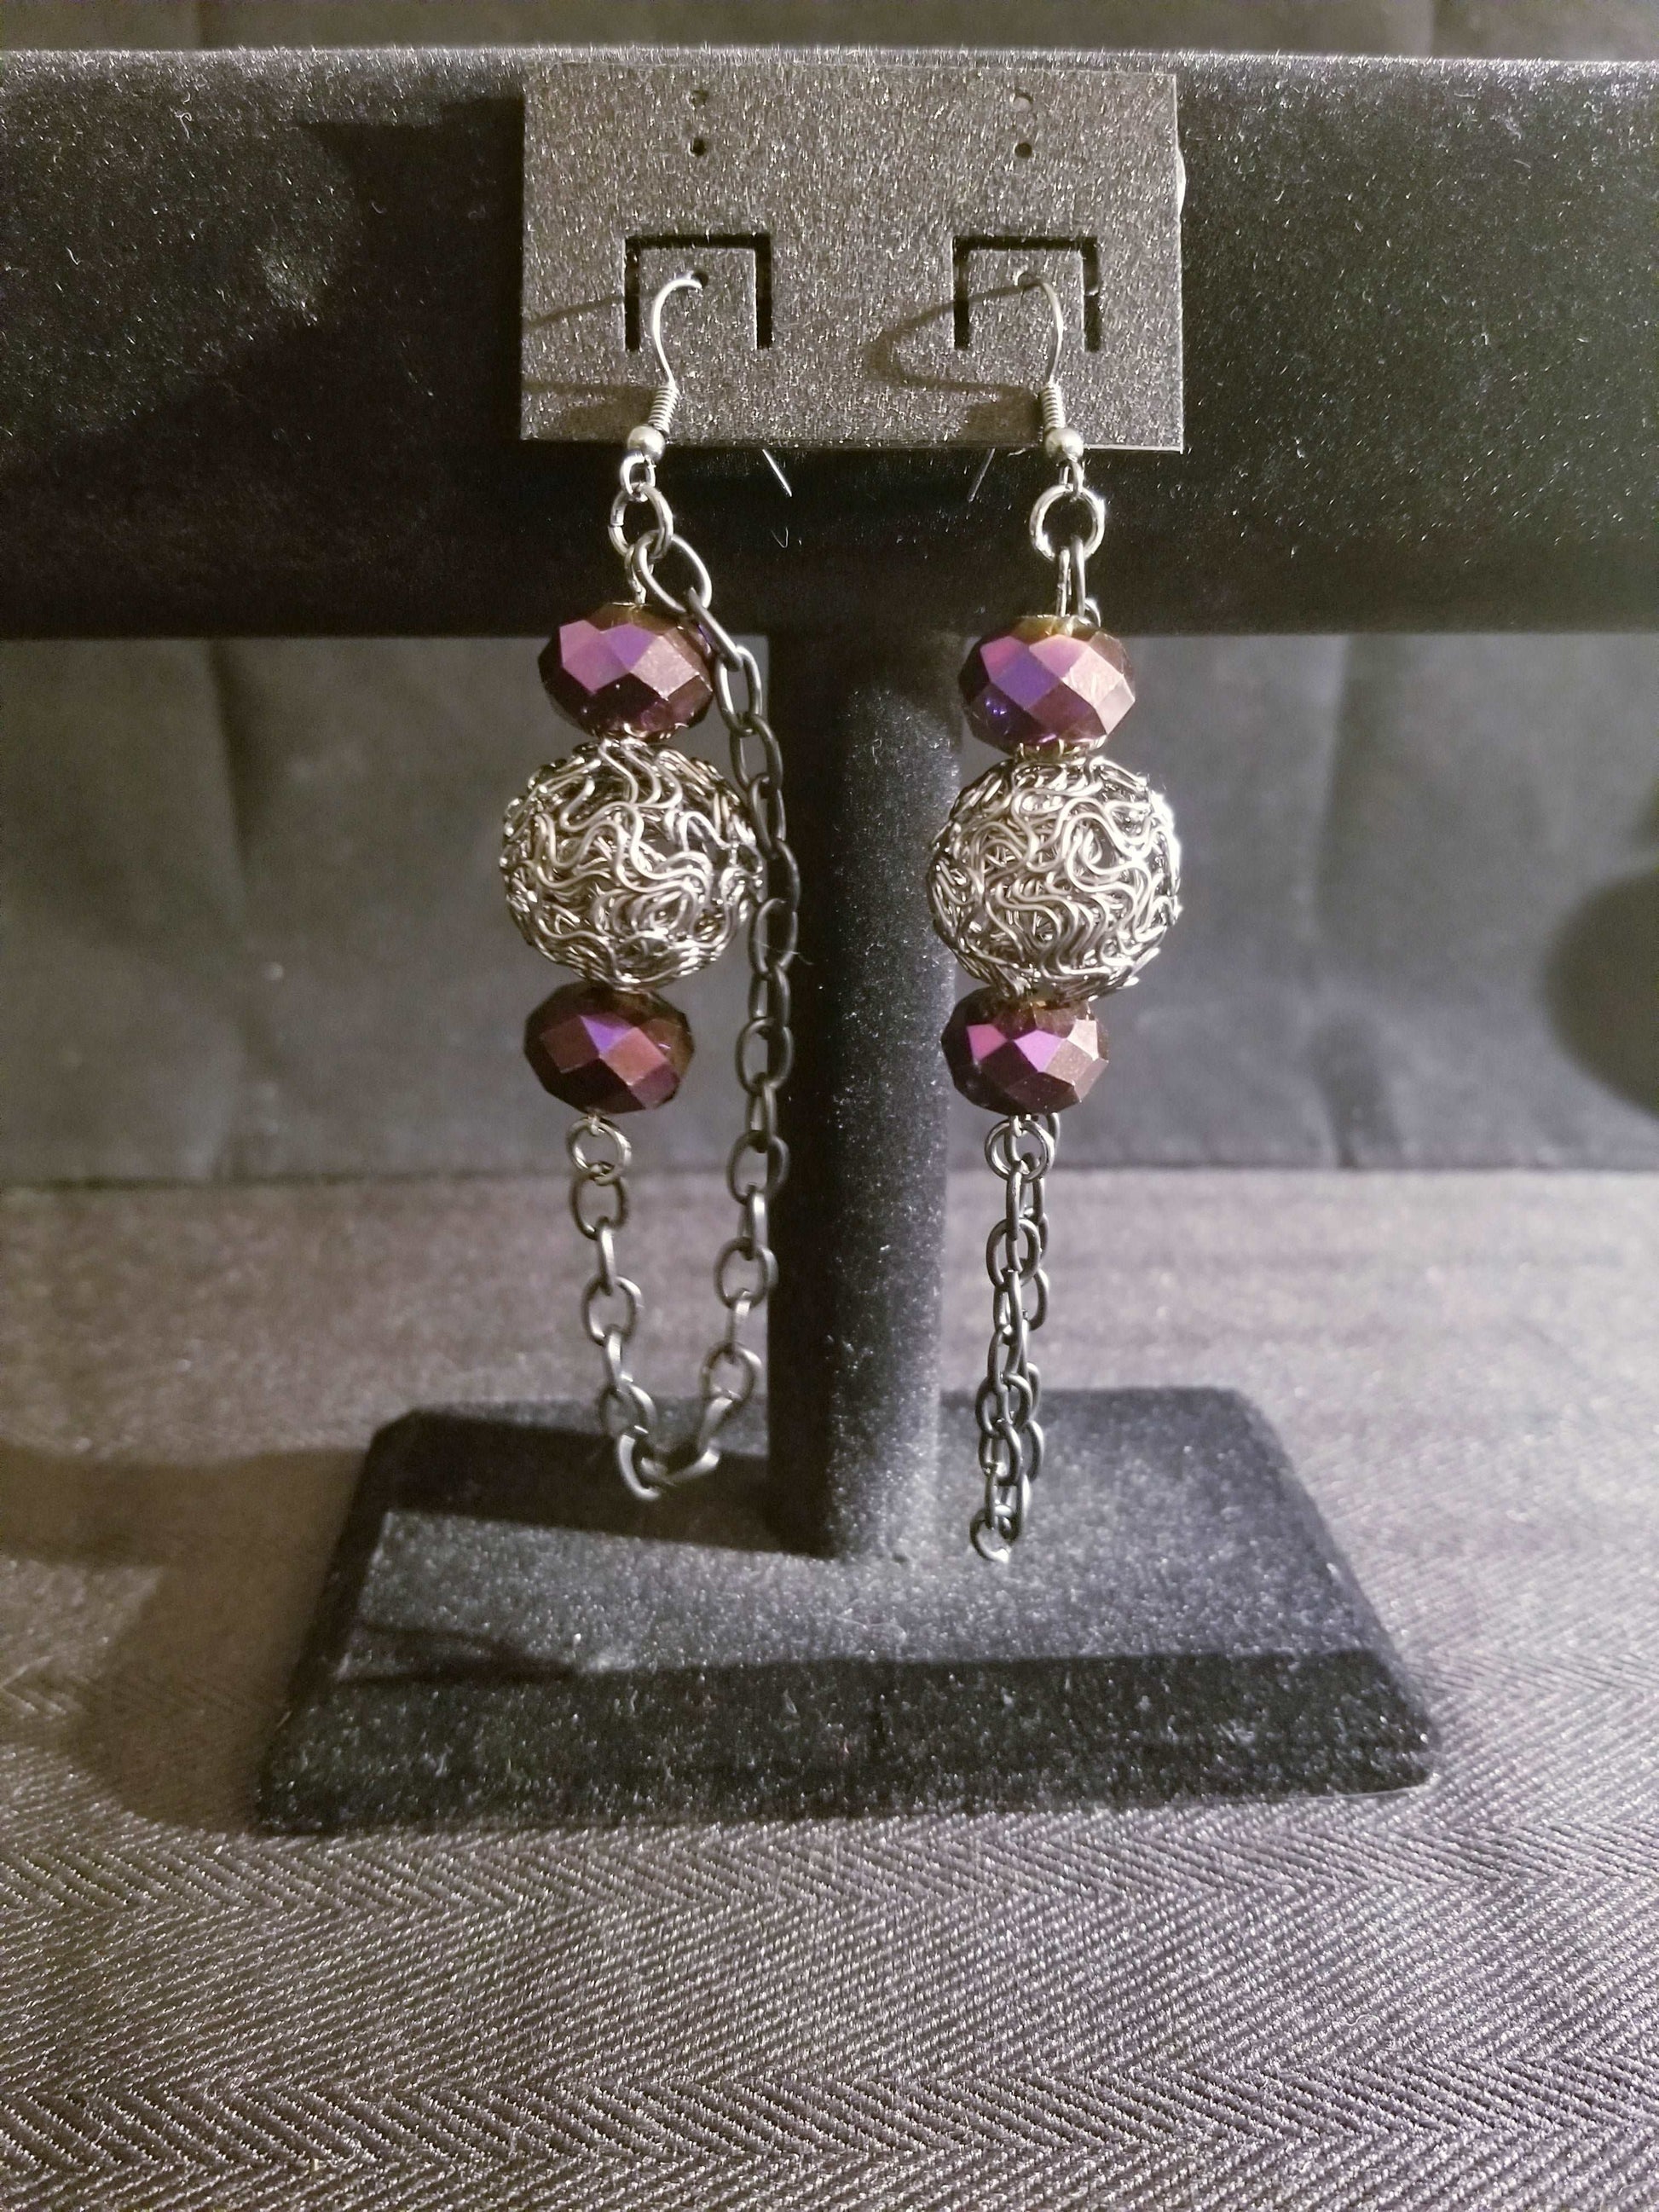 Women's Fashion Earrings Purple and Graphite Dangle with Chain Accent